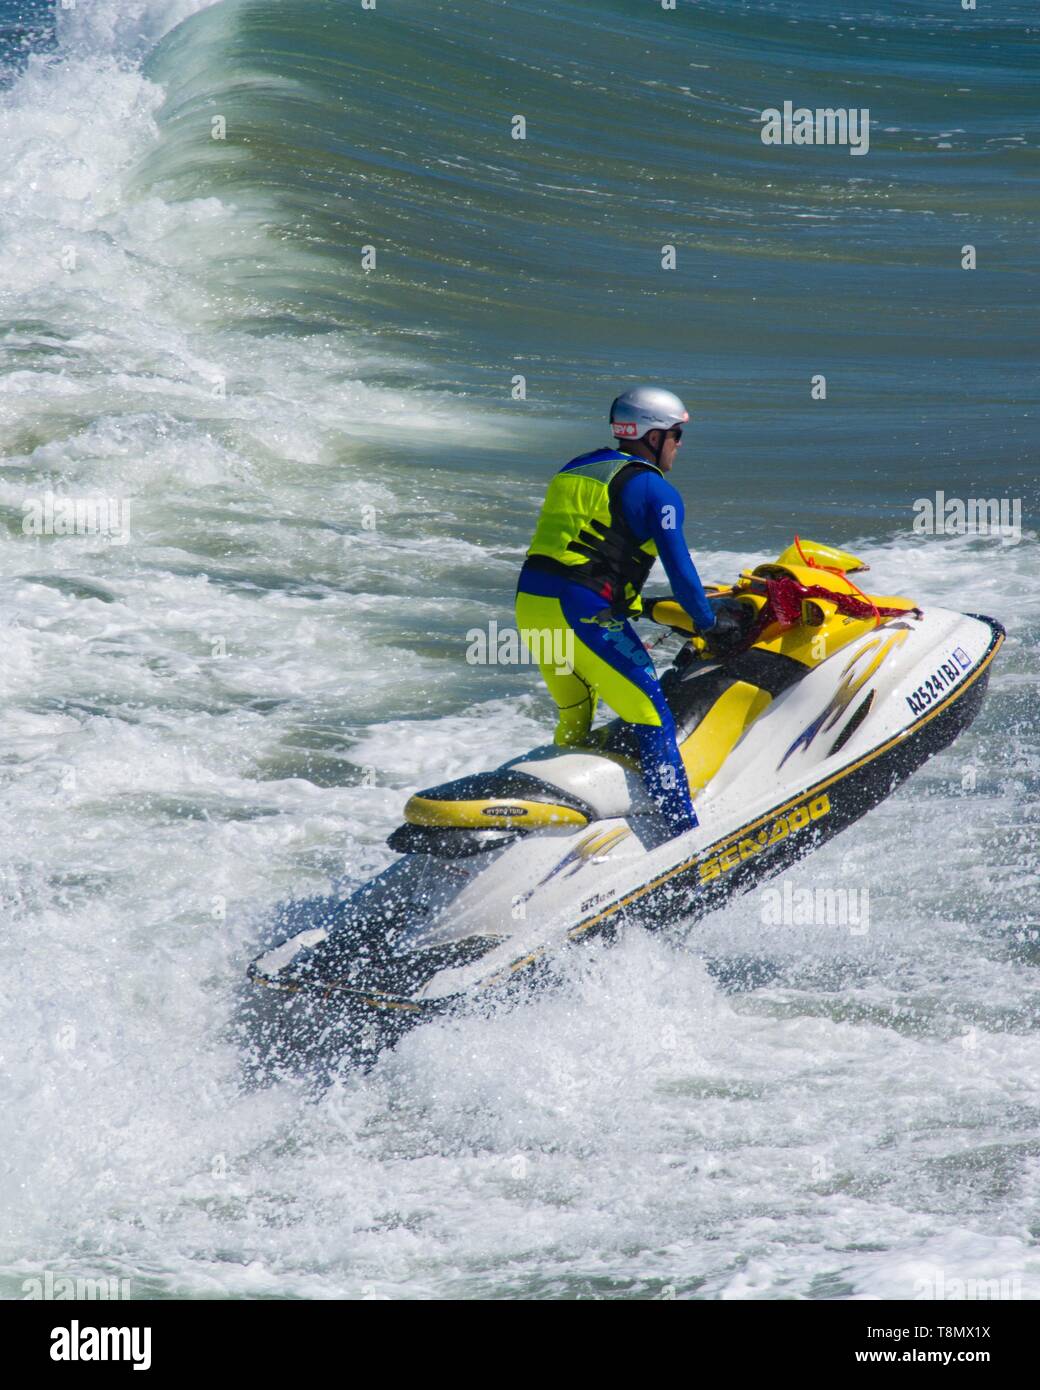 Huntington Beach, CA - April 7 2019: Jet skier riding the surf in a dramatic image. Stock Photo